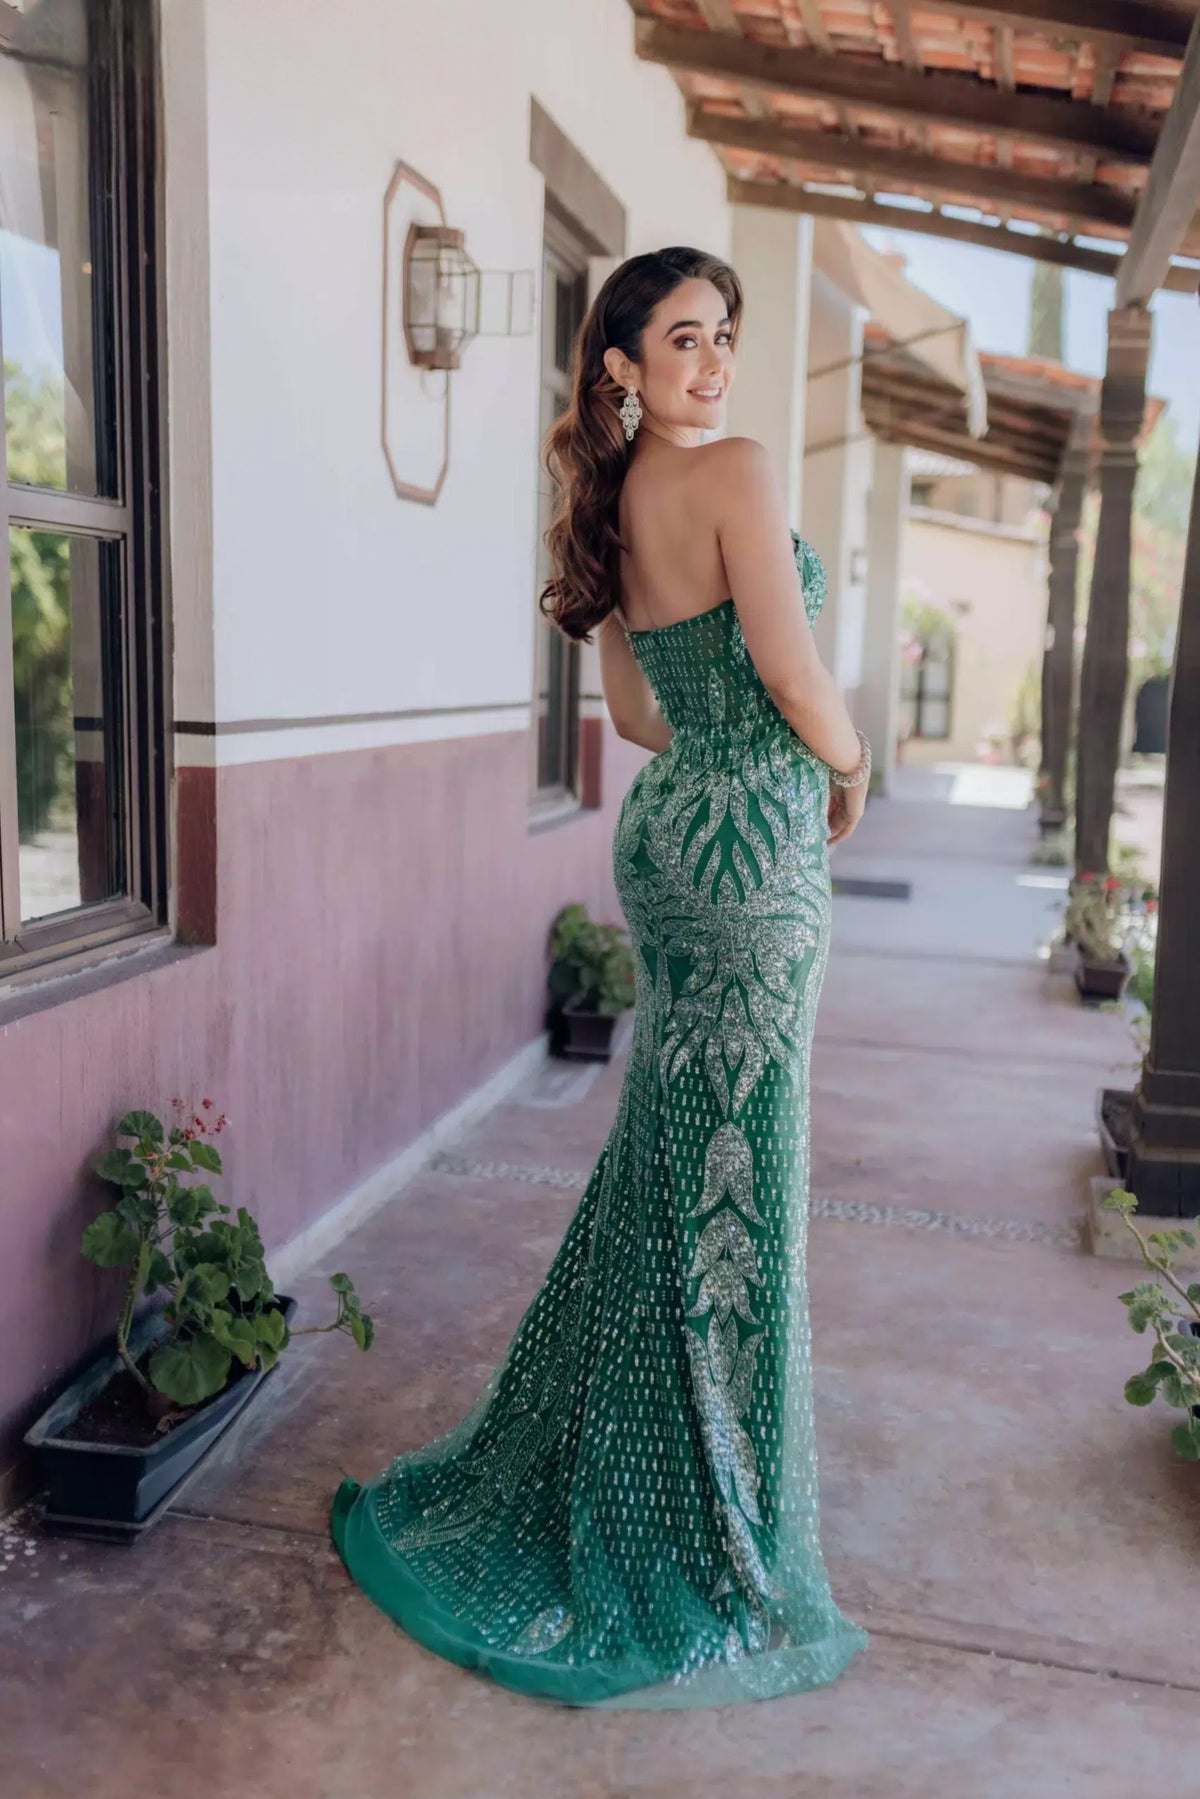 Elegant Terani Couture Prom Dress with Sparkly Embroidery | Perfect for Prom | Madeline's Boutique - Toronto and Boca Raton, Florida Locations.  Picture of Model wearing emerald.